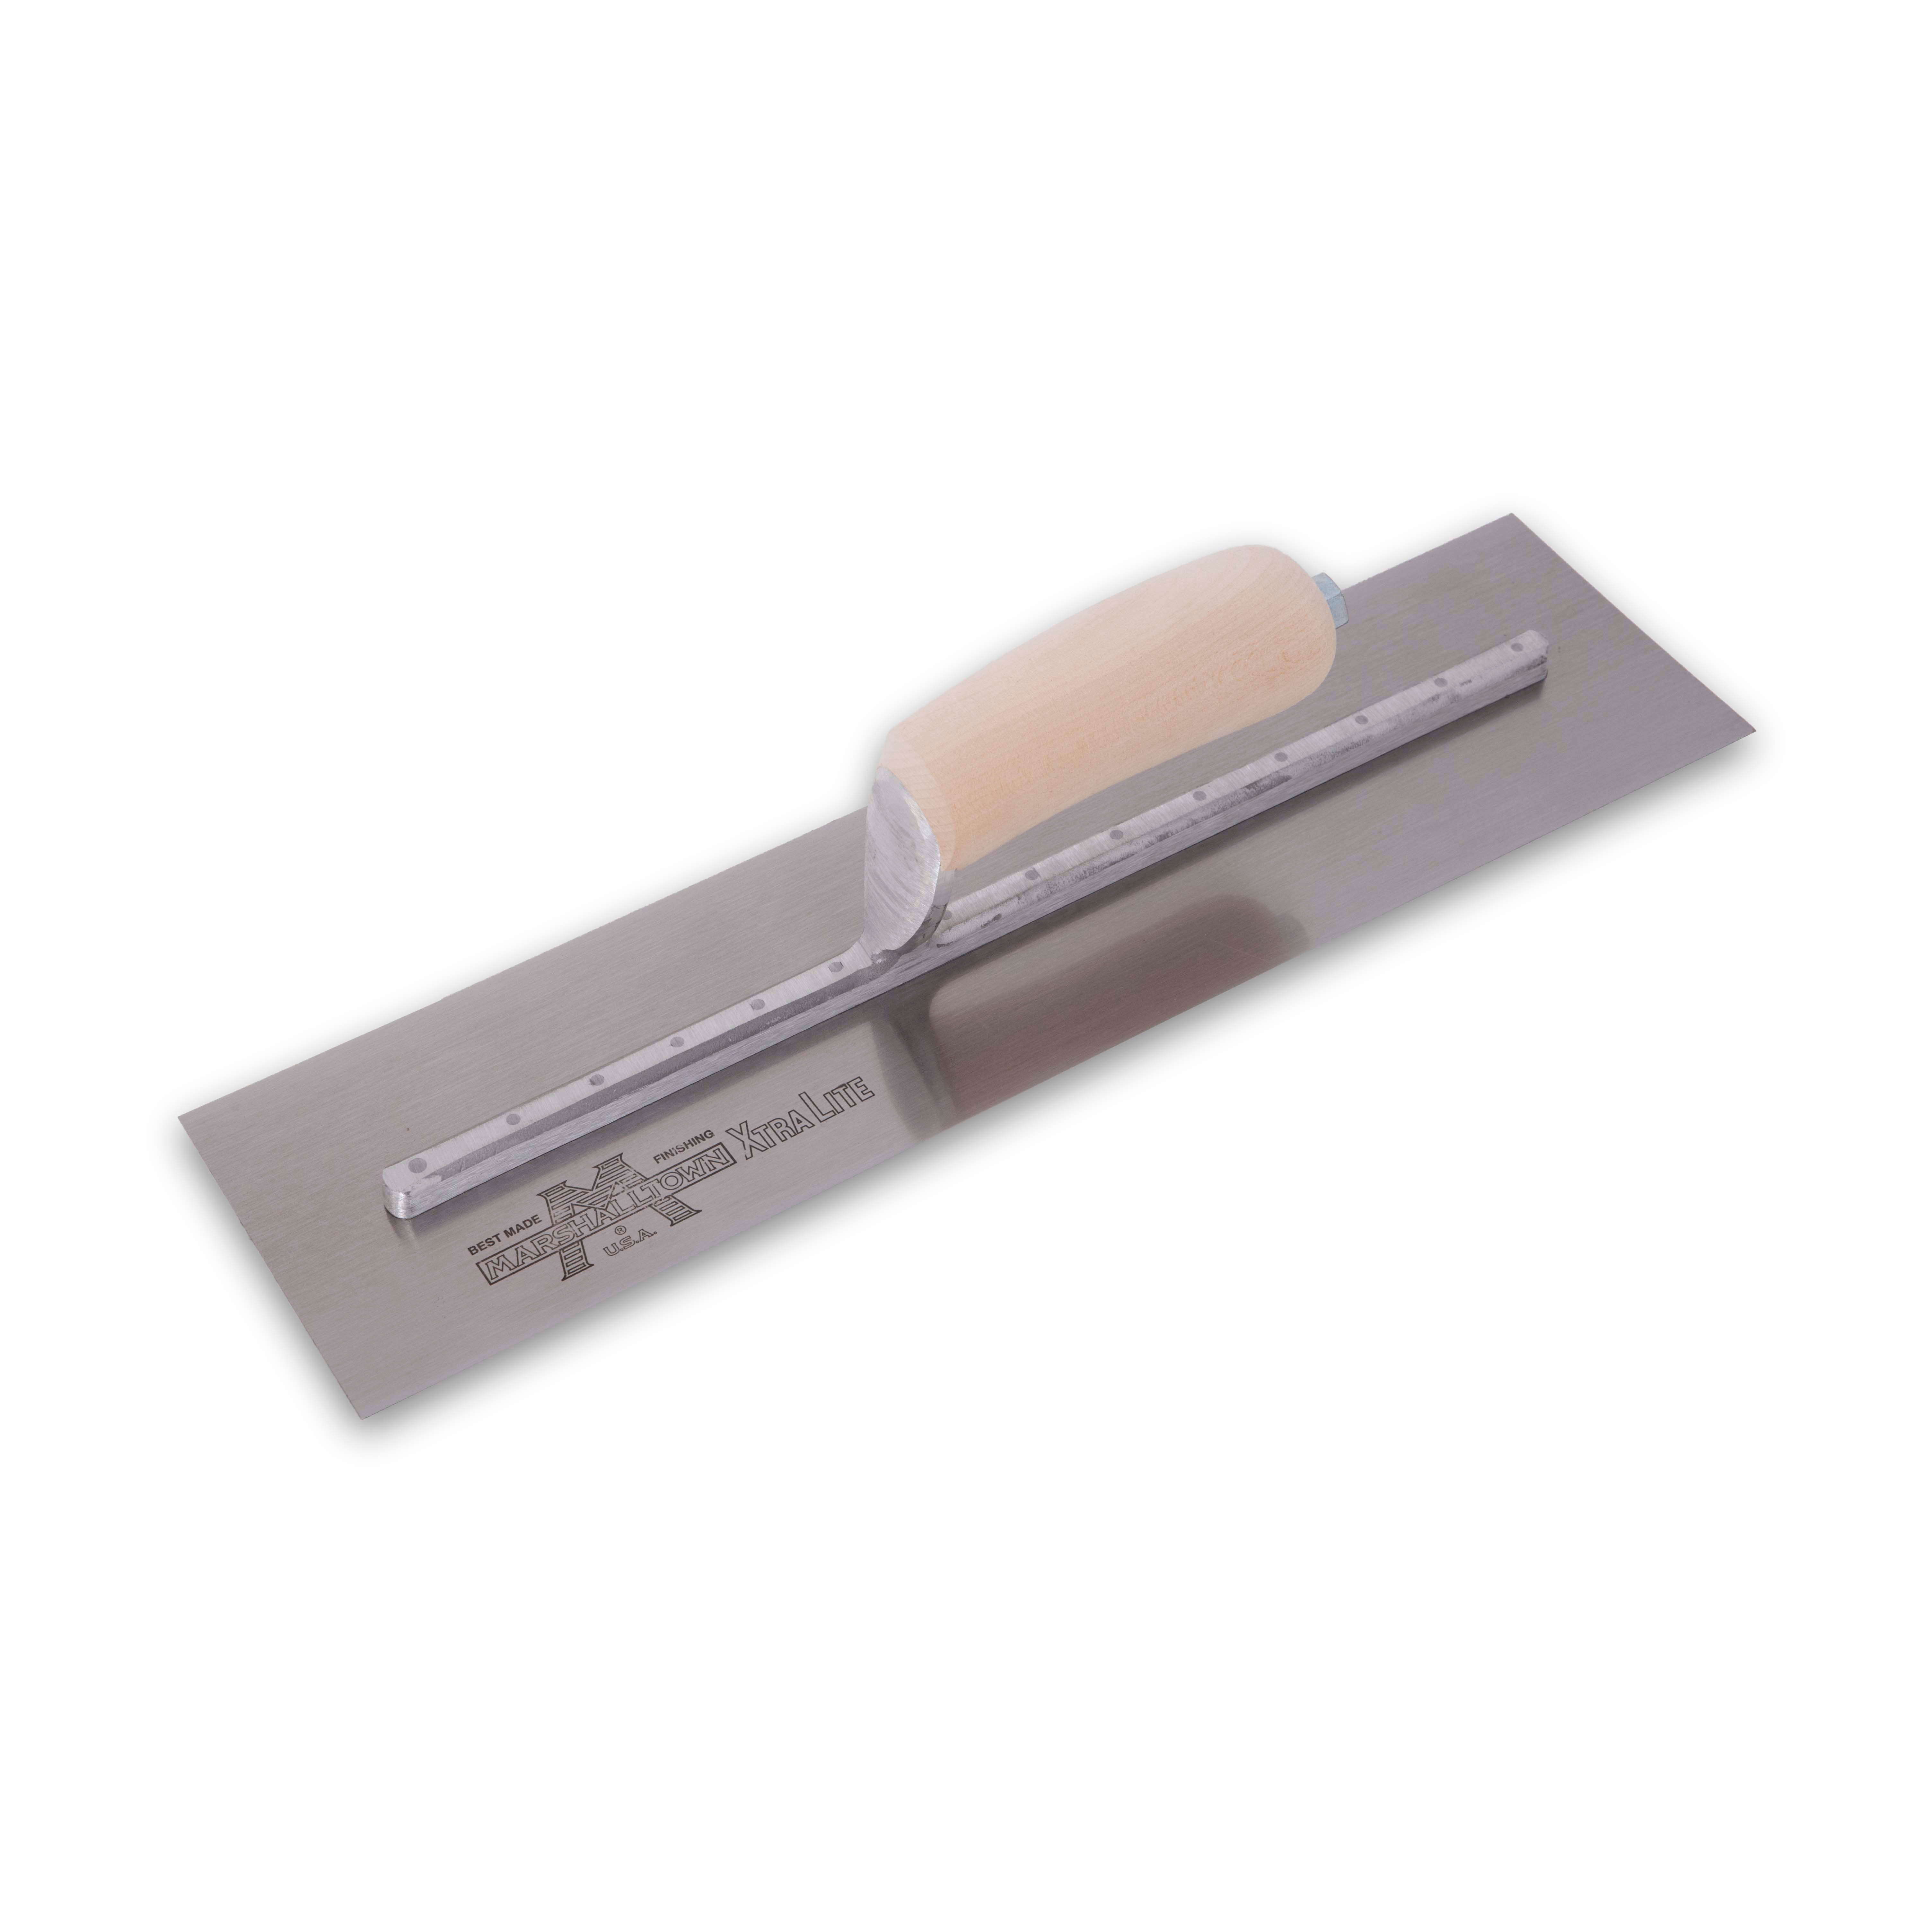 Marshalltown MXS66 16in. x 4in. High Carbon Steel Finishing Trowel with Wood MAT-MXS66